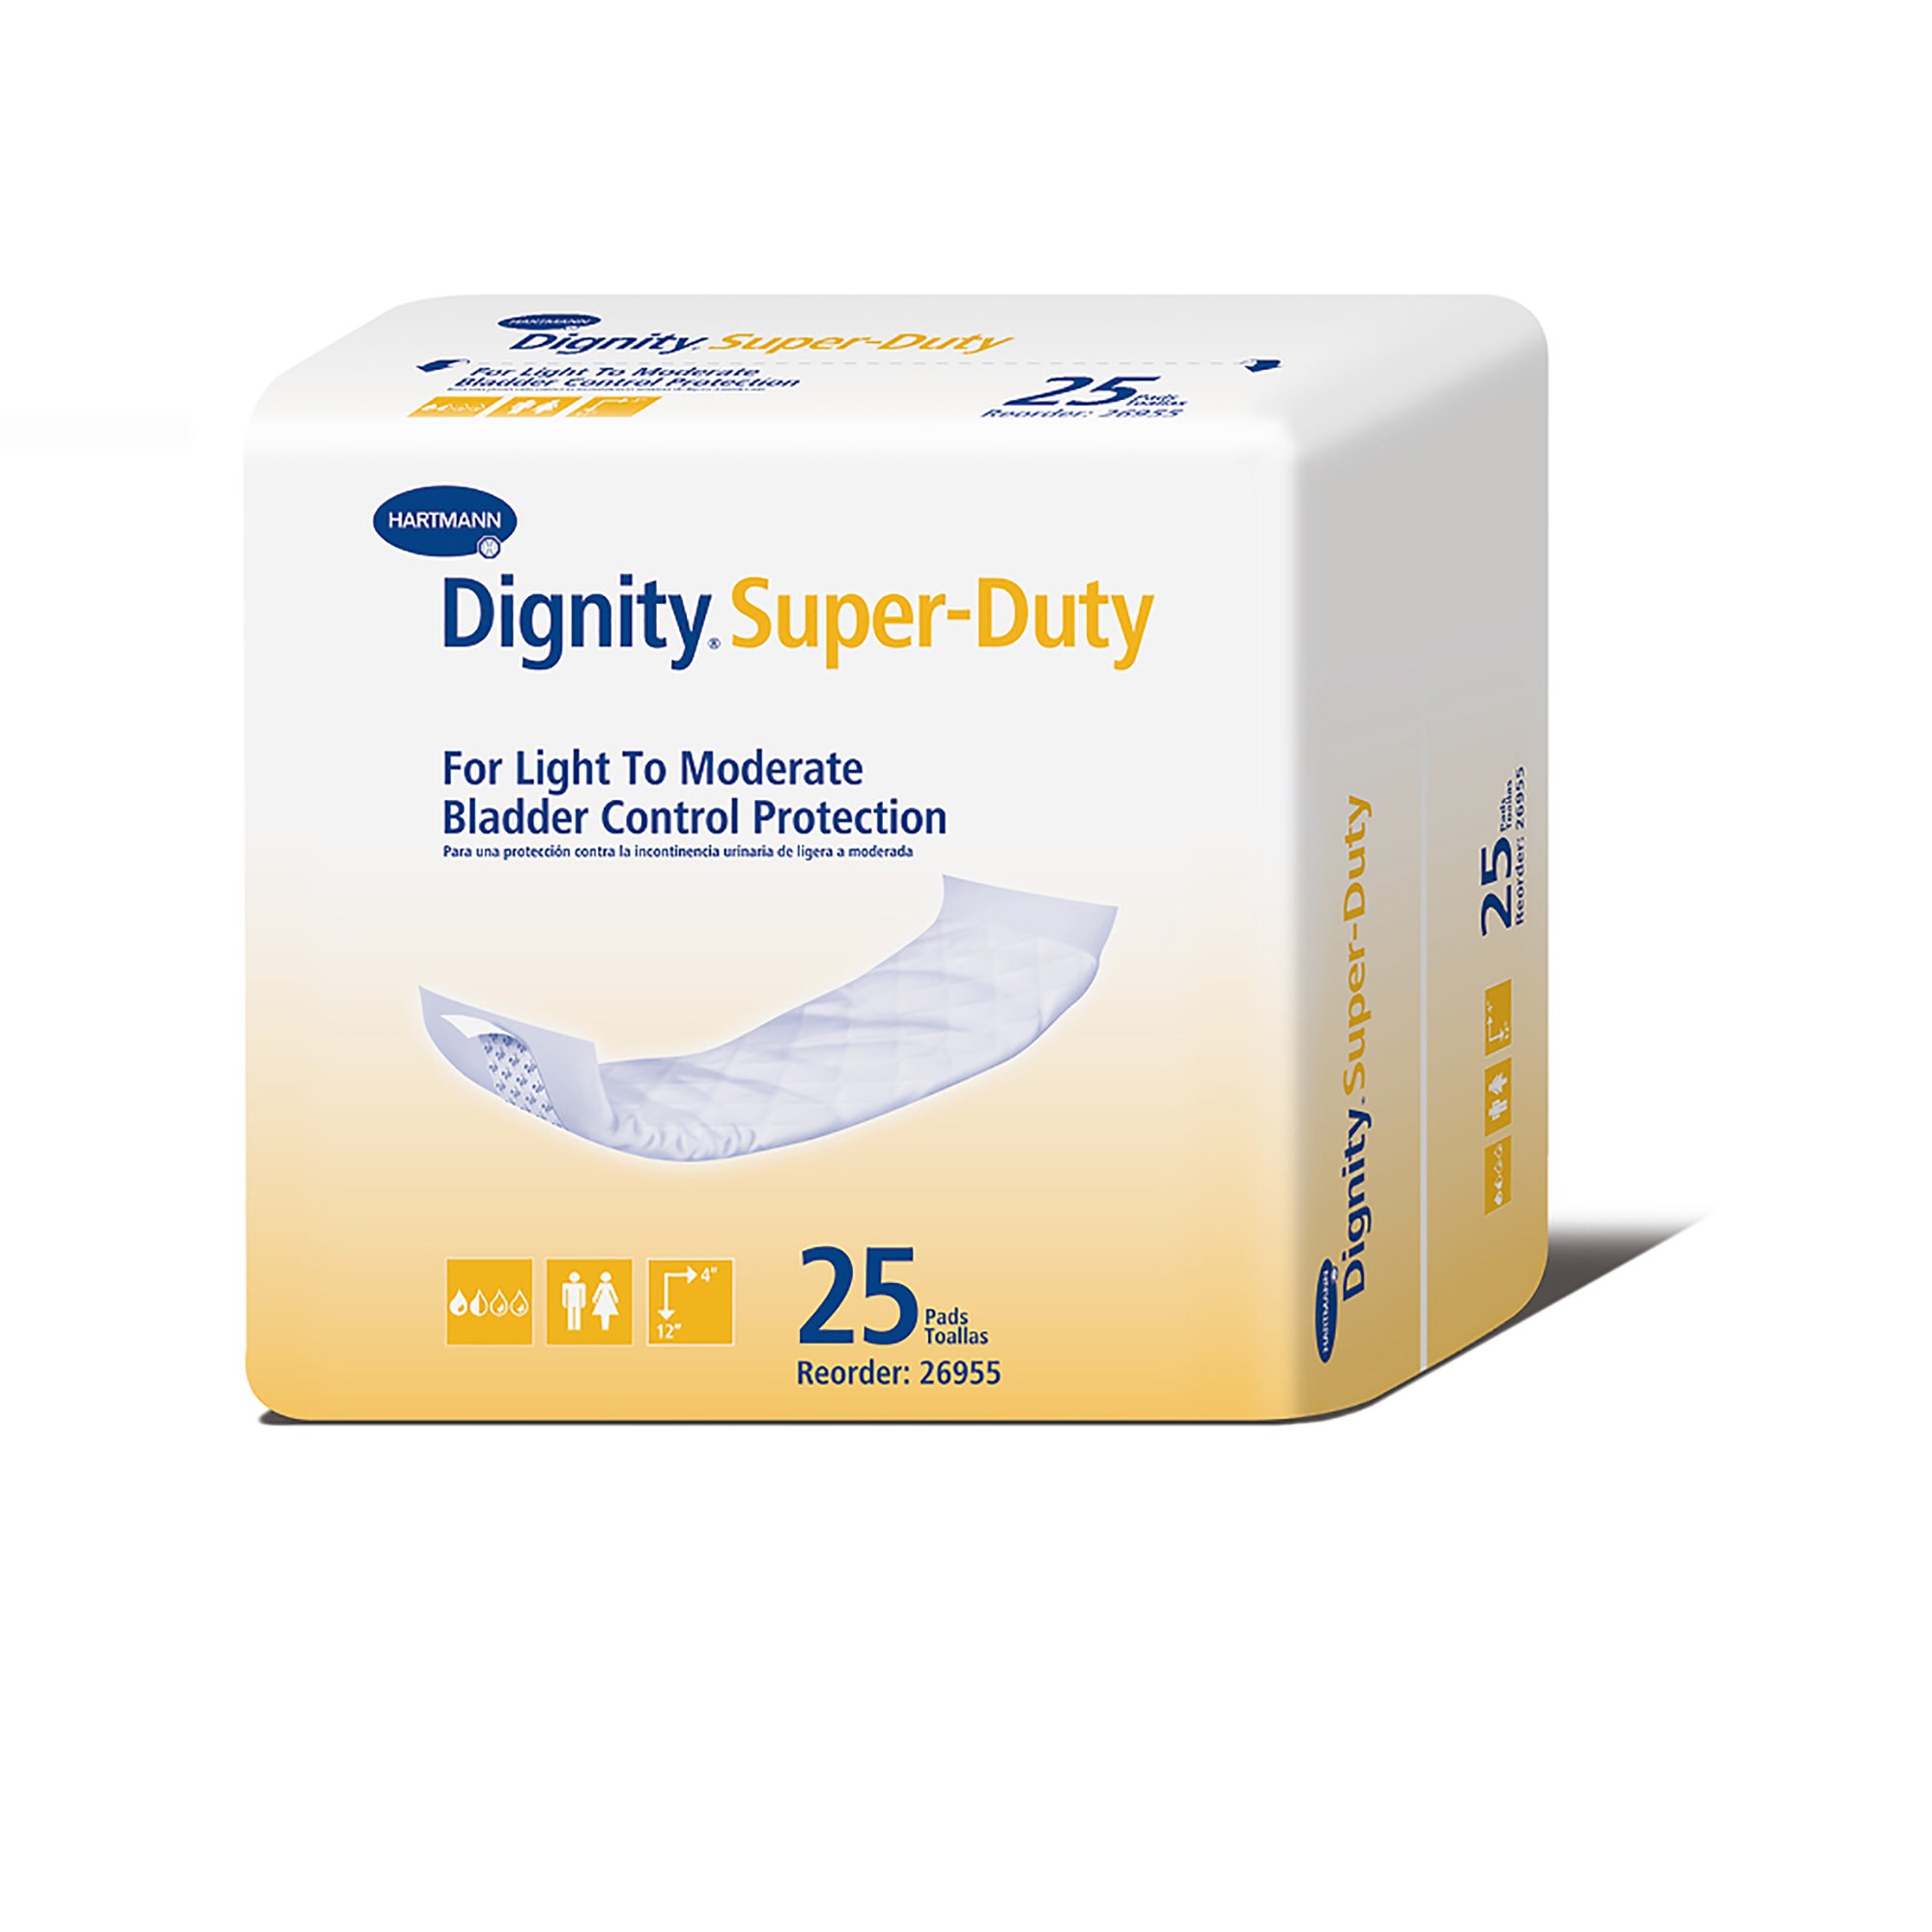 Dignity Incontinence Liner 4" x 12", Moderate Absorbency, Polymer Core, One Size Fits Most Adults, Unisex, Disposable